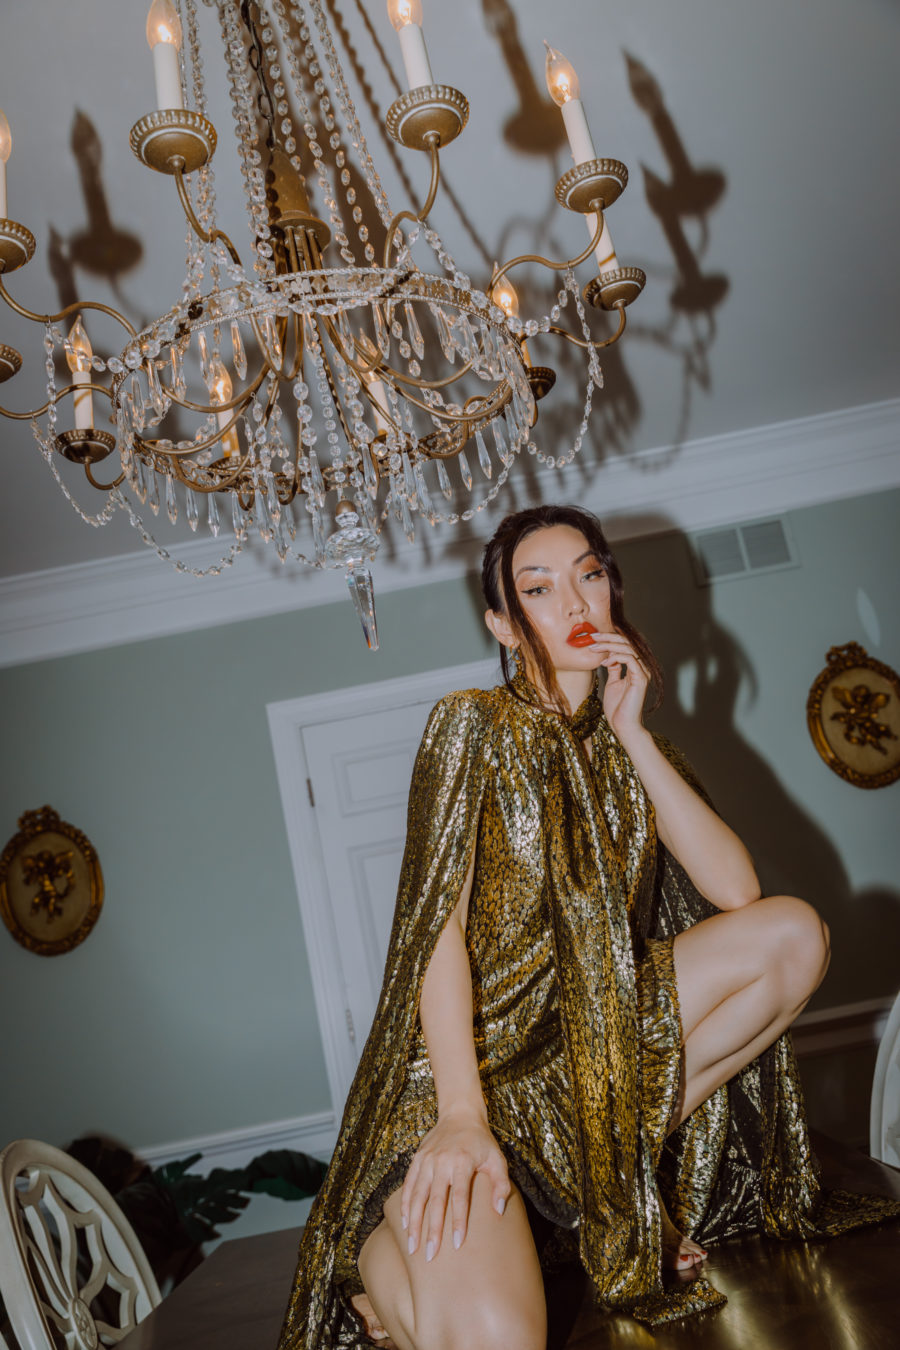 jessica wang wearing a gold dress at home sharing cyber monday deals for 2020 // jessica wang - Notjessfashion.com